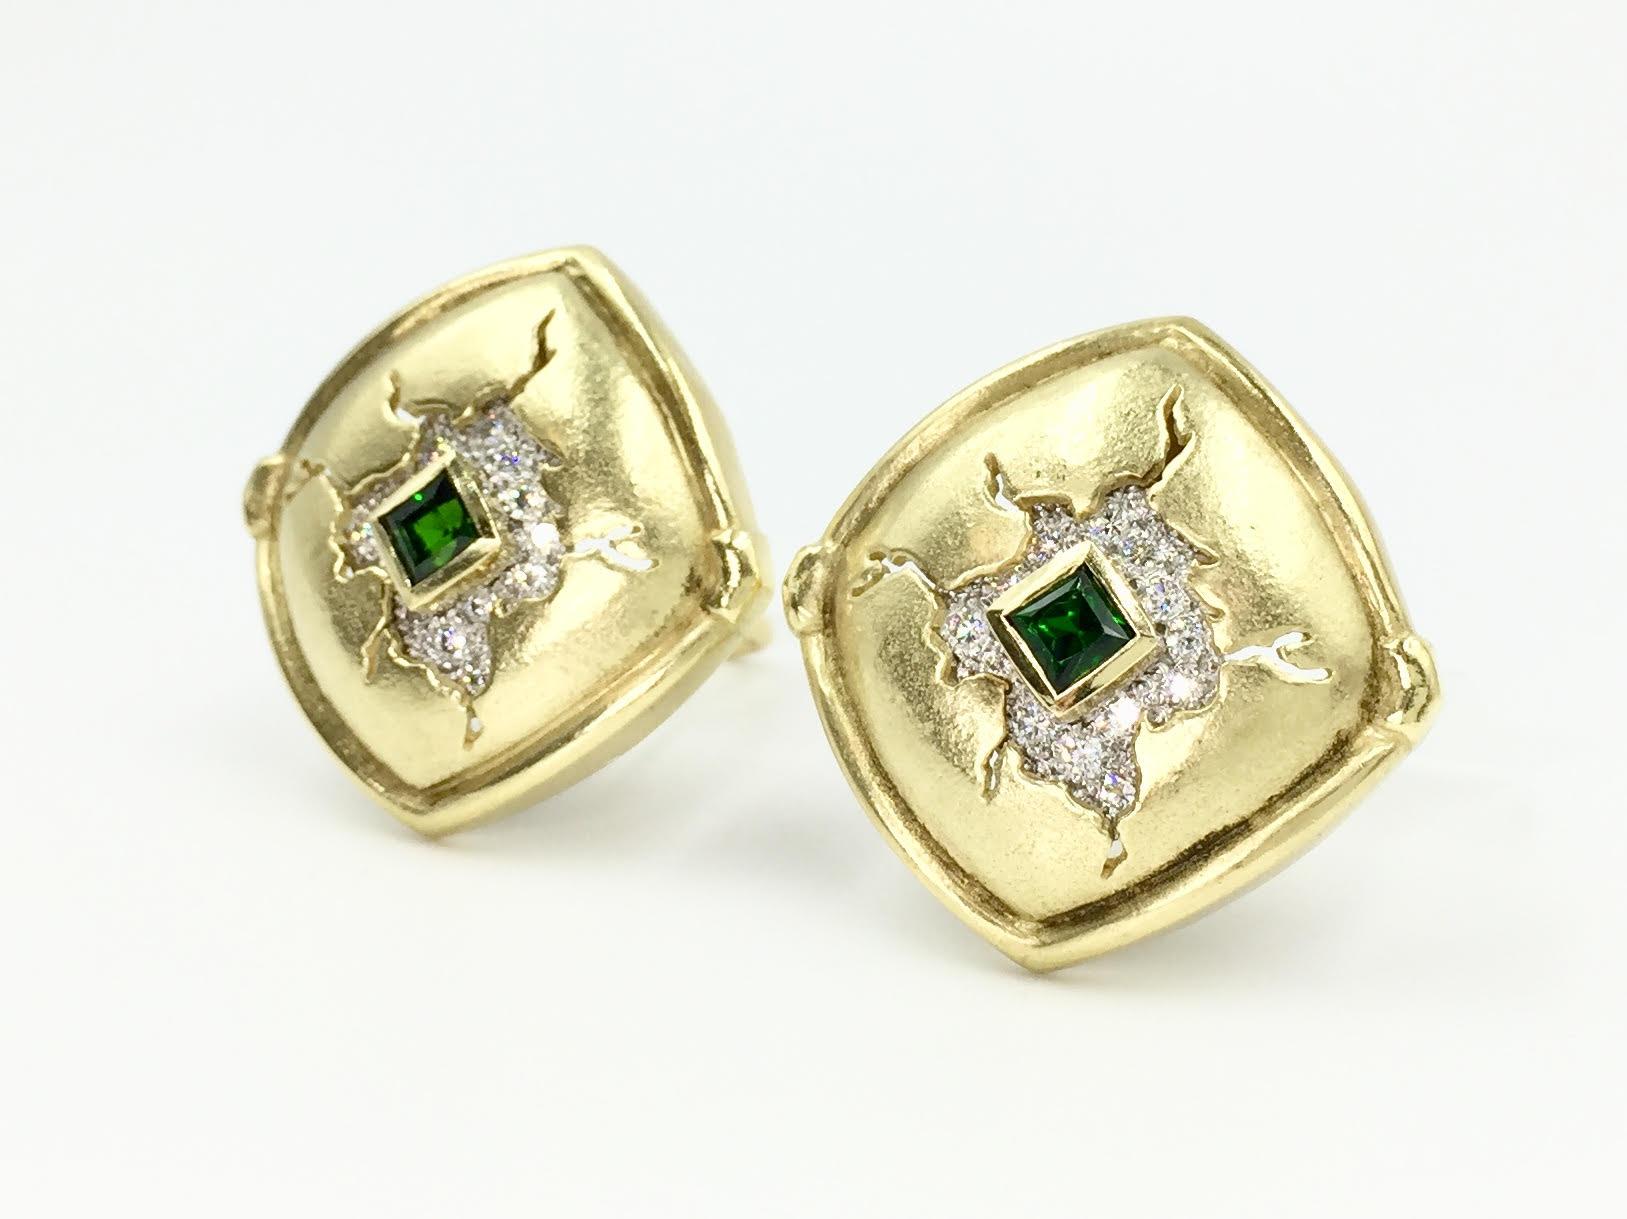 Seidengang 18 Karat and Platinum Diamond and Chrome Tourmaline Button Earrings In Excellent Condition For Sale In Pikesville, MD